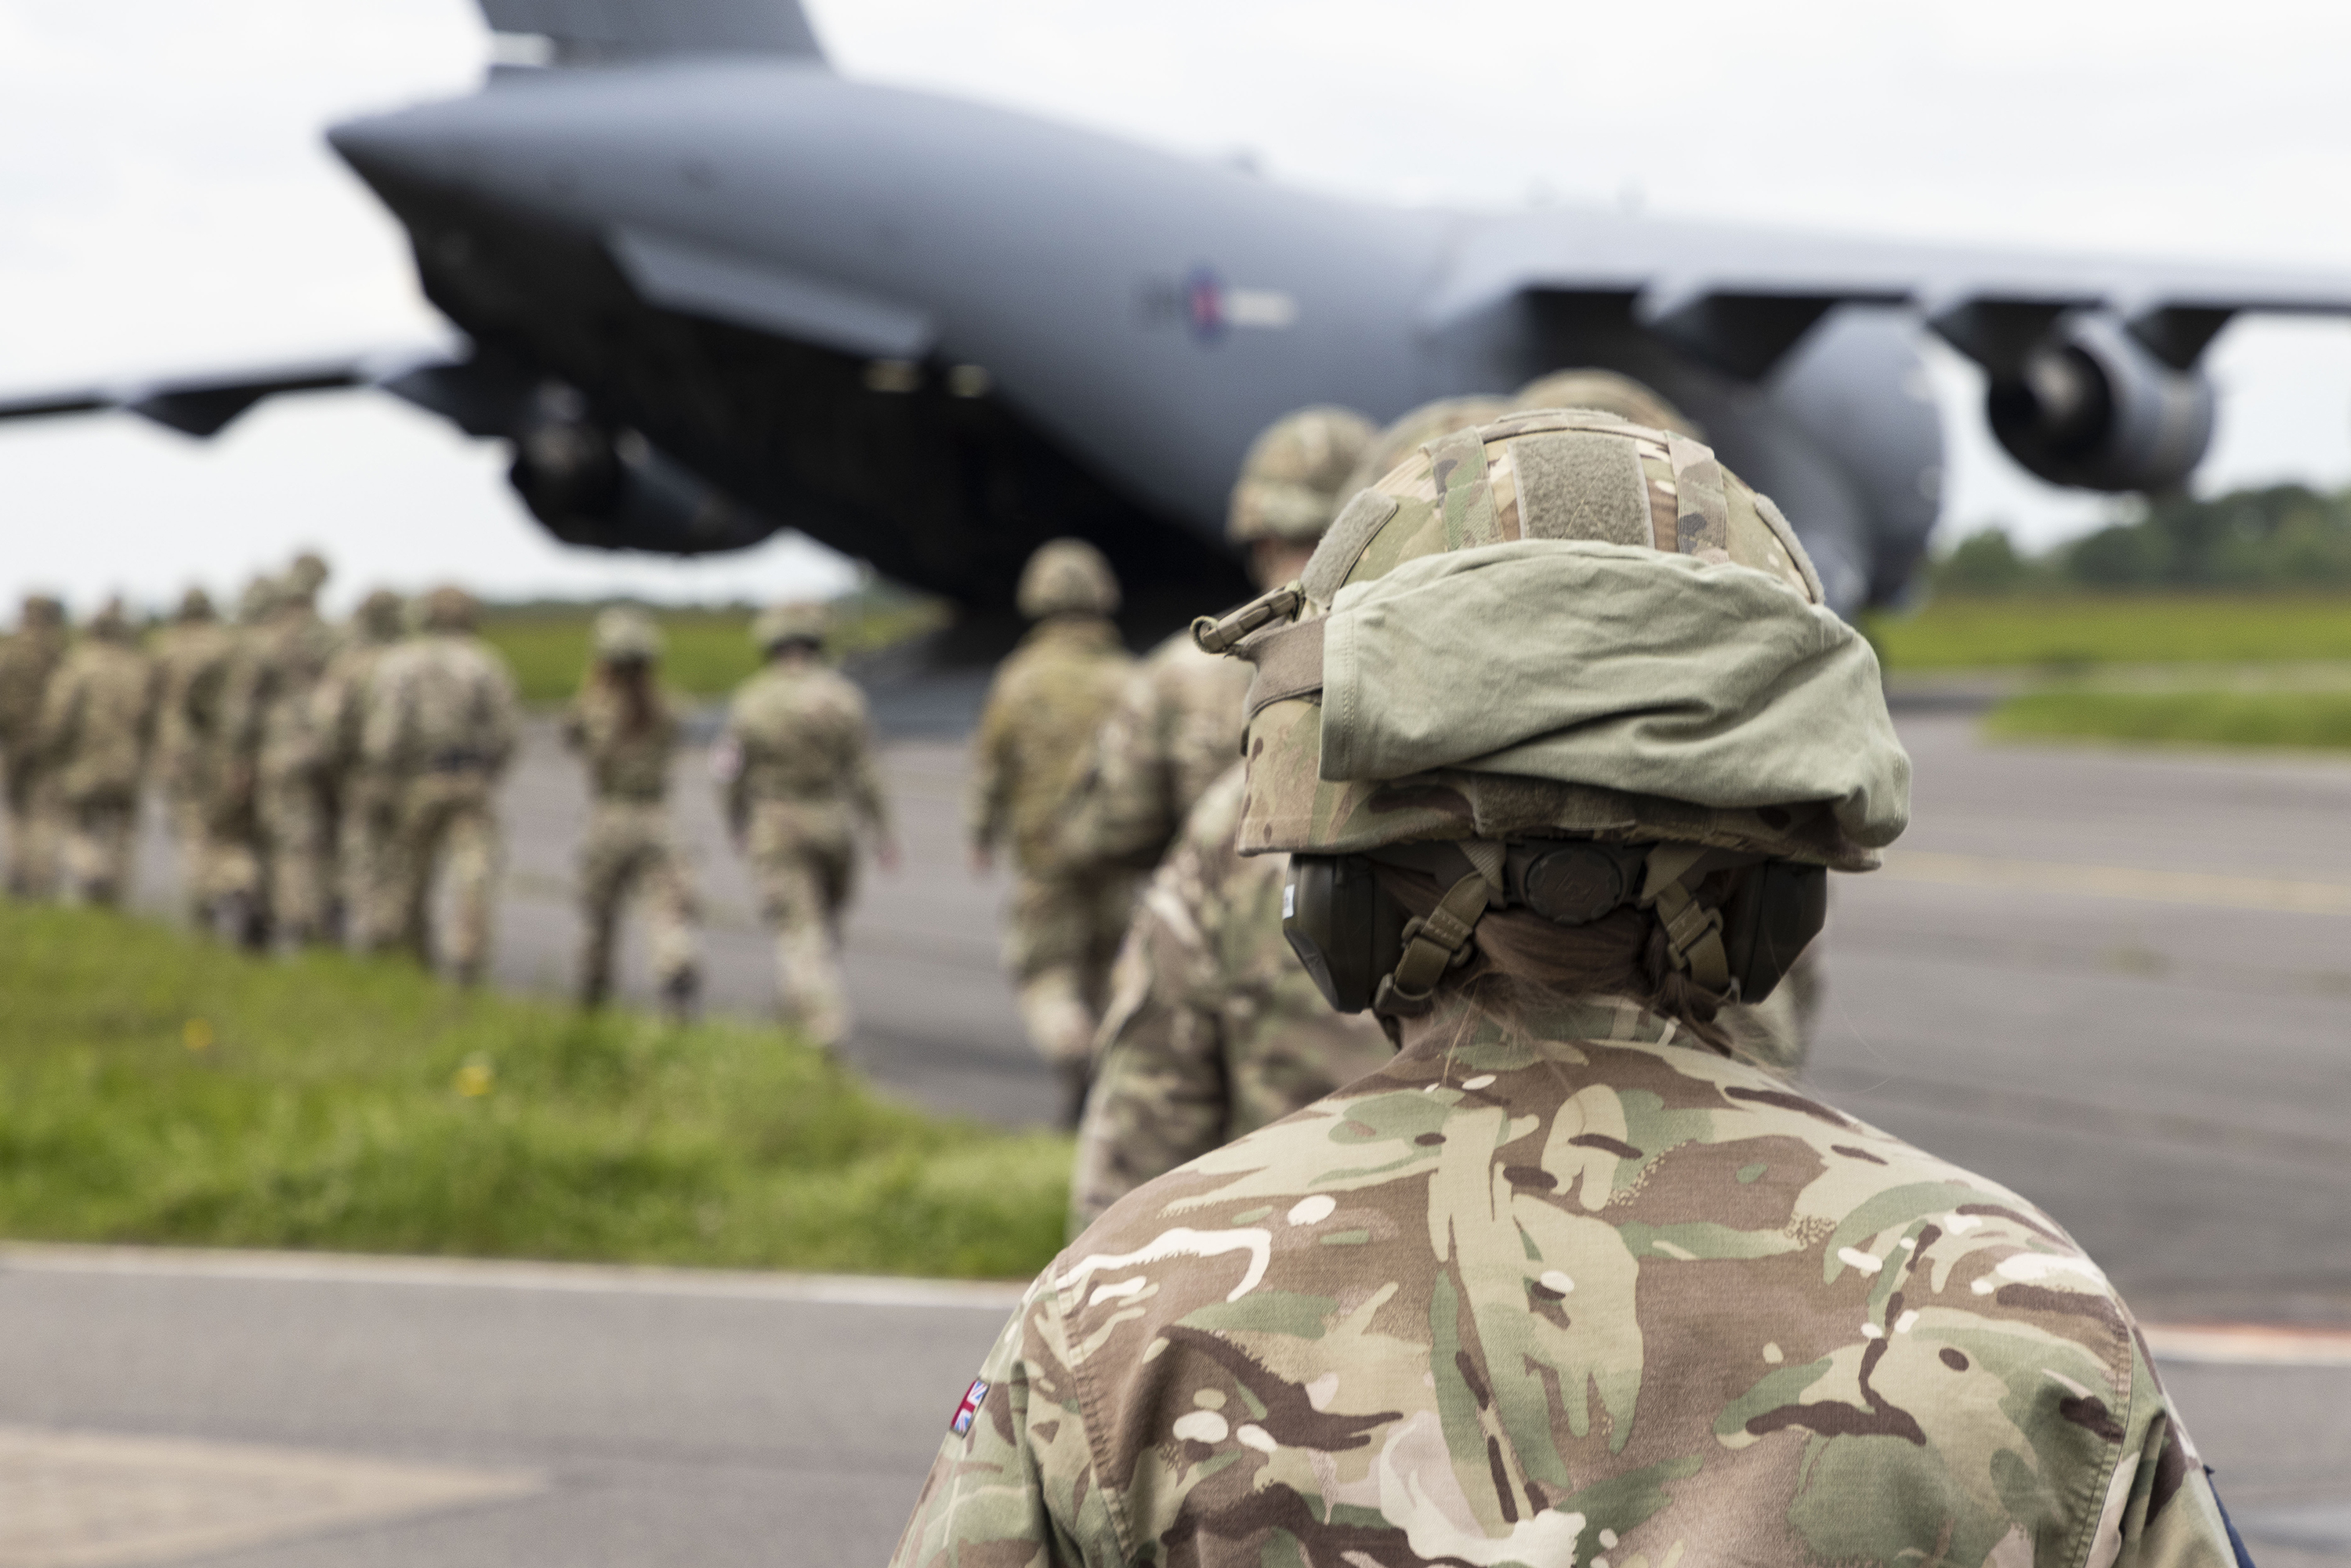 Engineers and logisticians from Royal Air Force Wittering, participated with other Force Elements from Global Enablement, in the inaugural Exercise AUXILIUM FORT